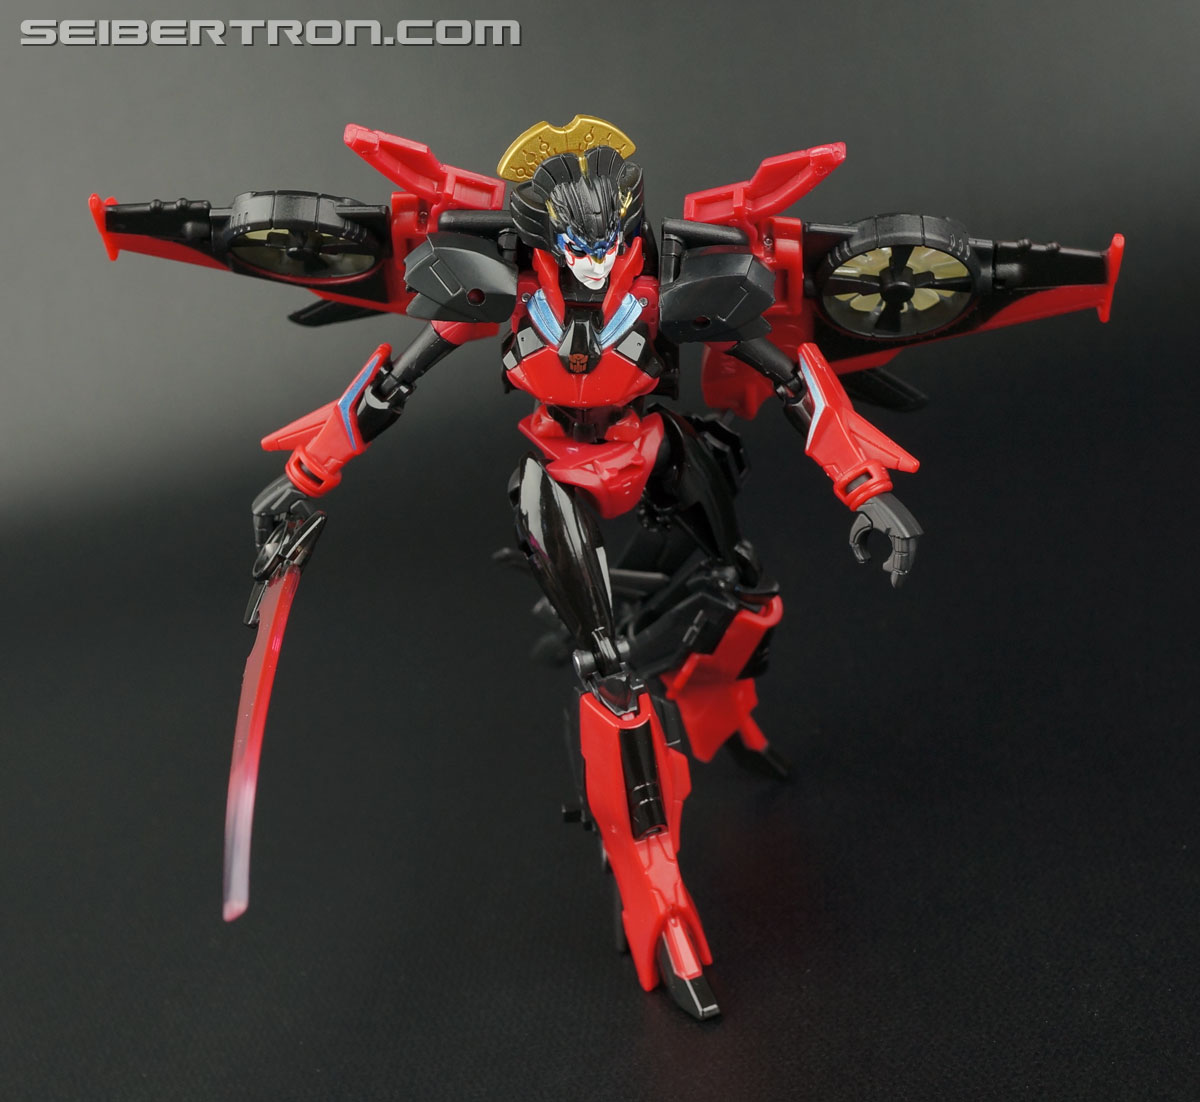  Energon Pub Forums • Female Autobot WINDBLADE to debut in Transformers  Robots In Disguise cartoon